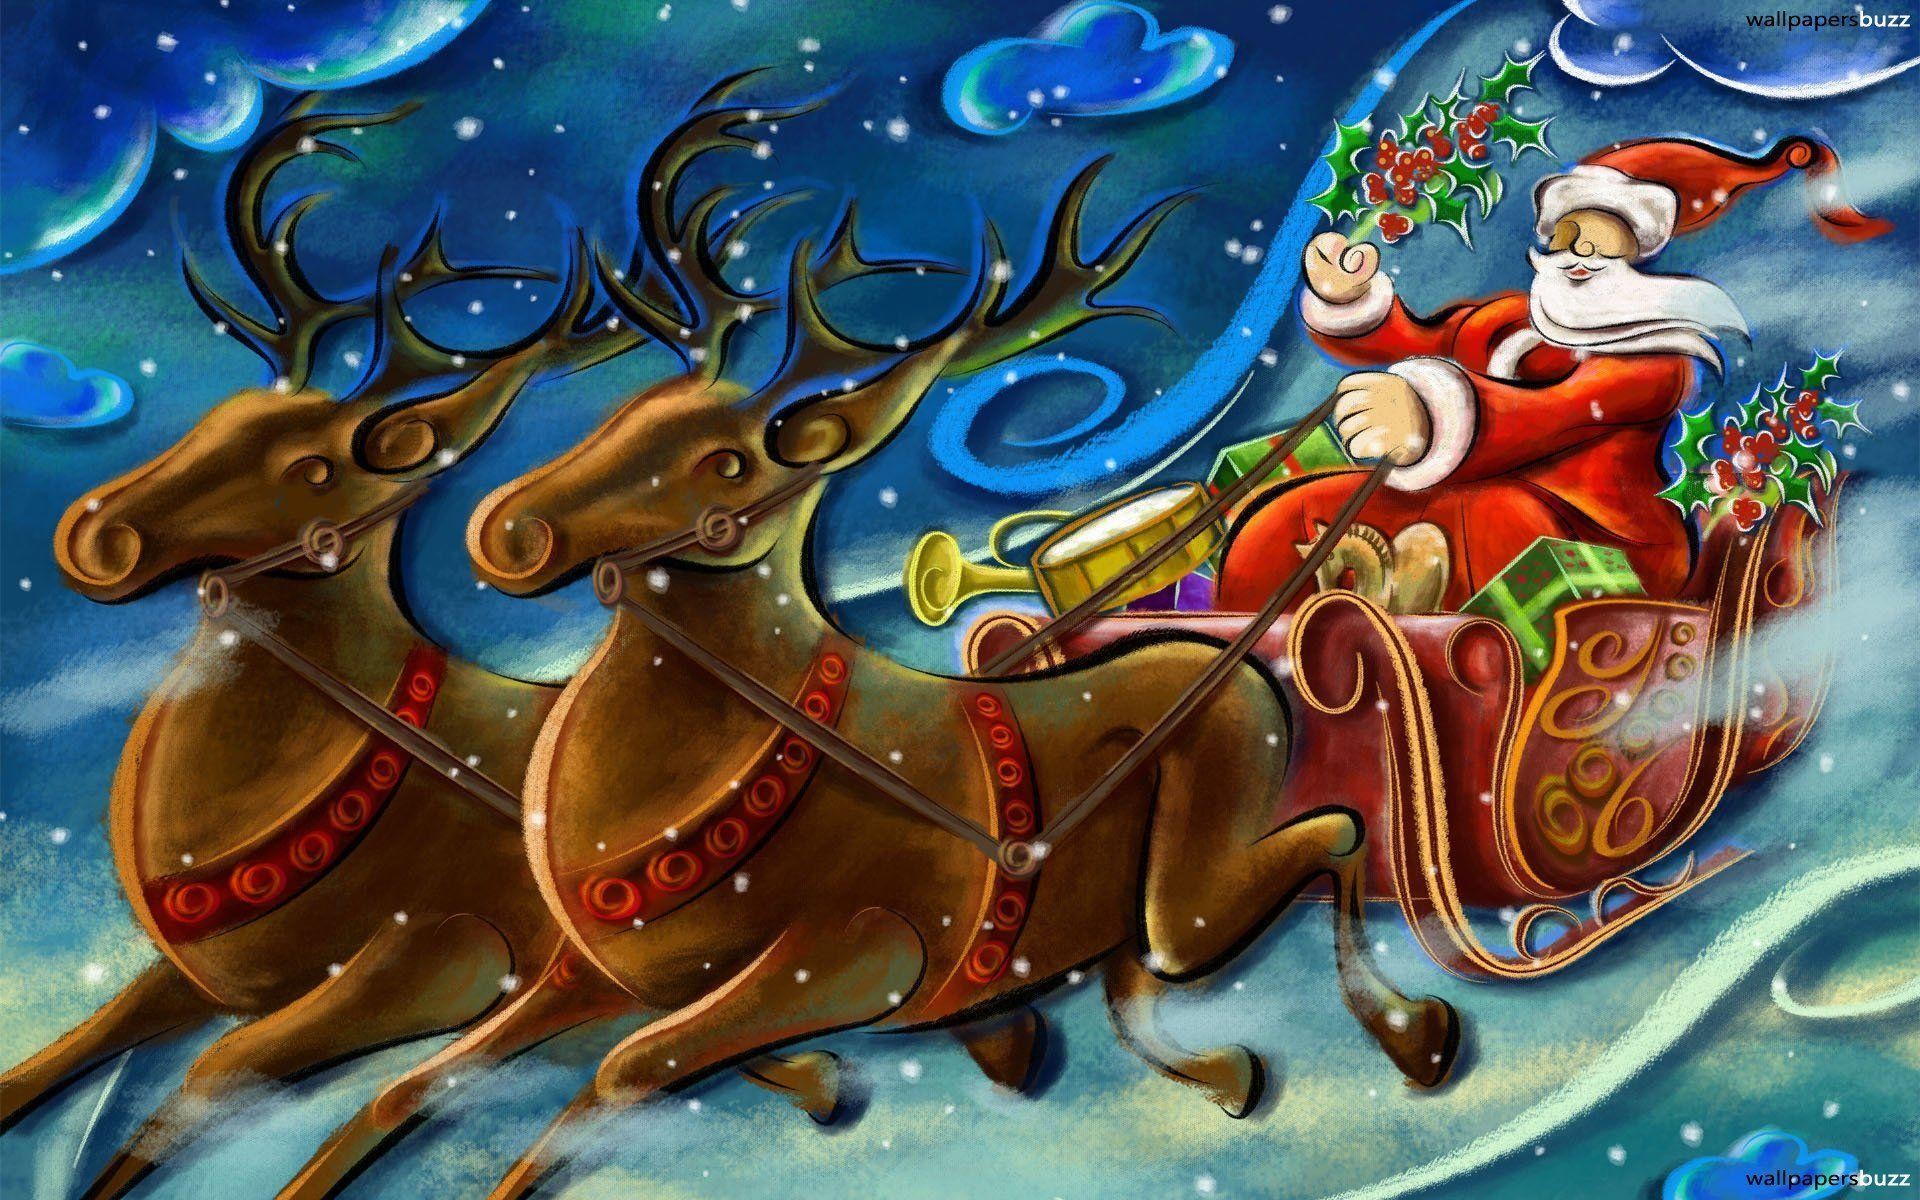 1920x1200 Animated Christmas Wallpapers - Full HD wallpaper search